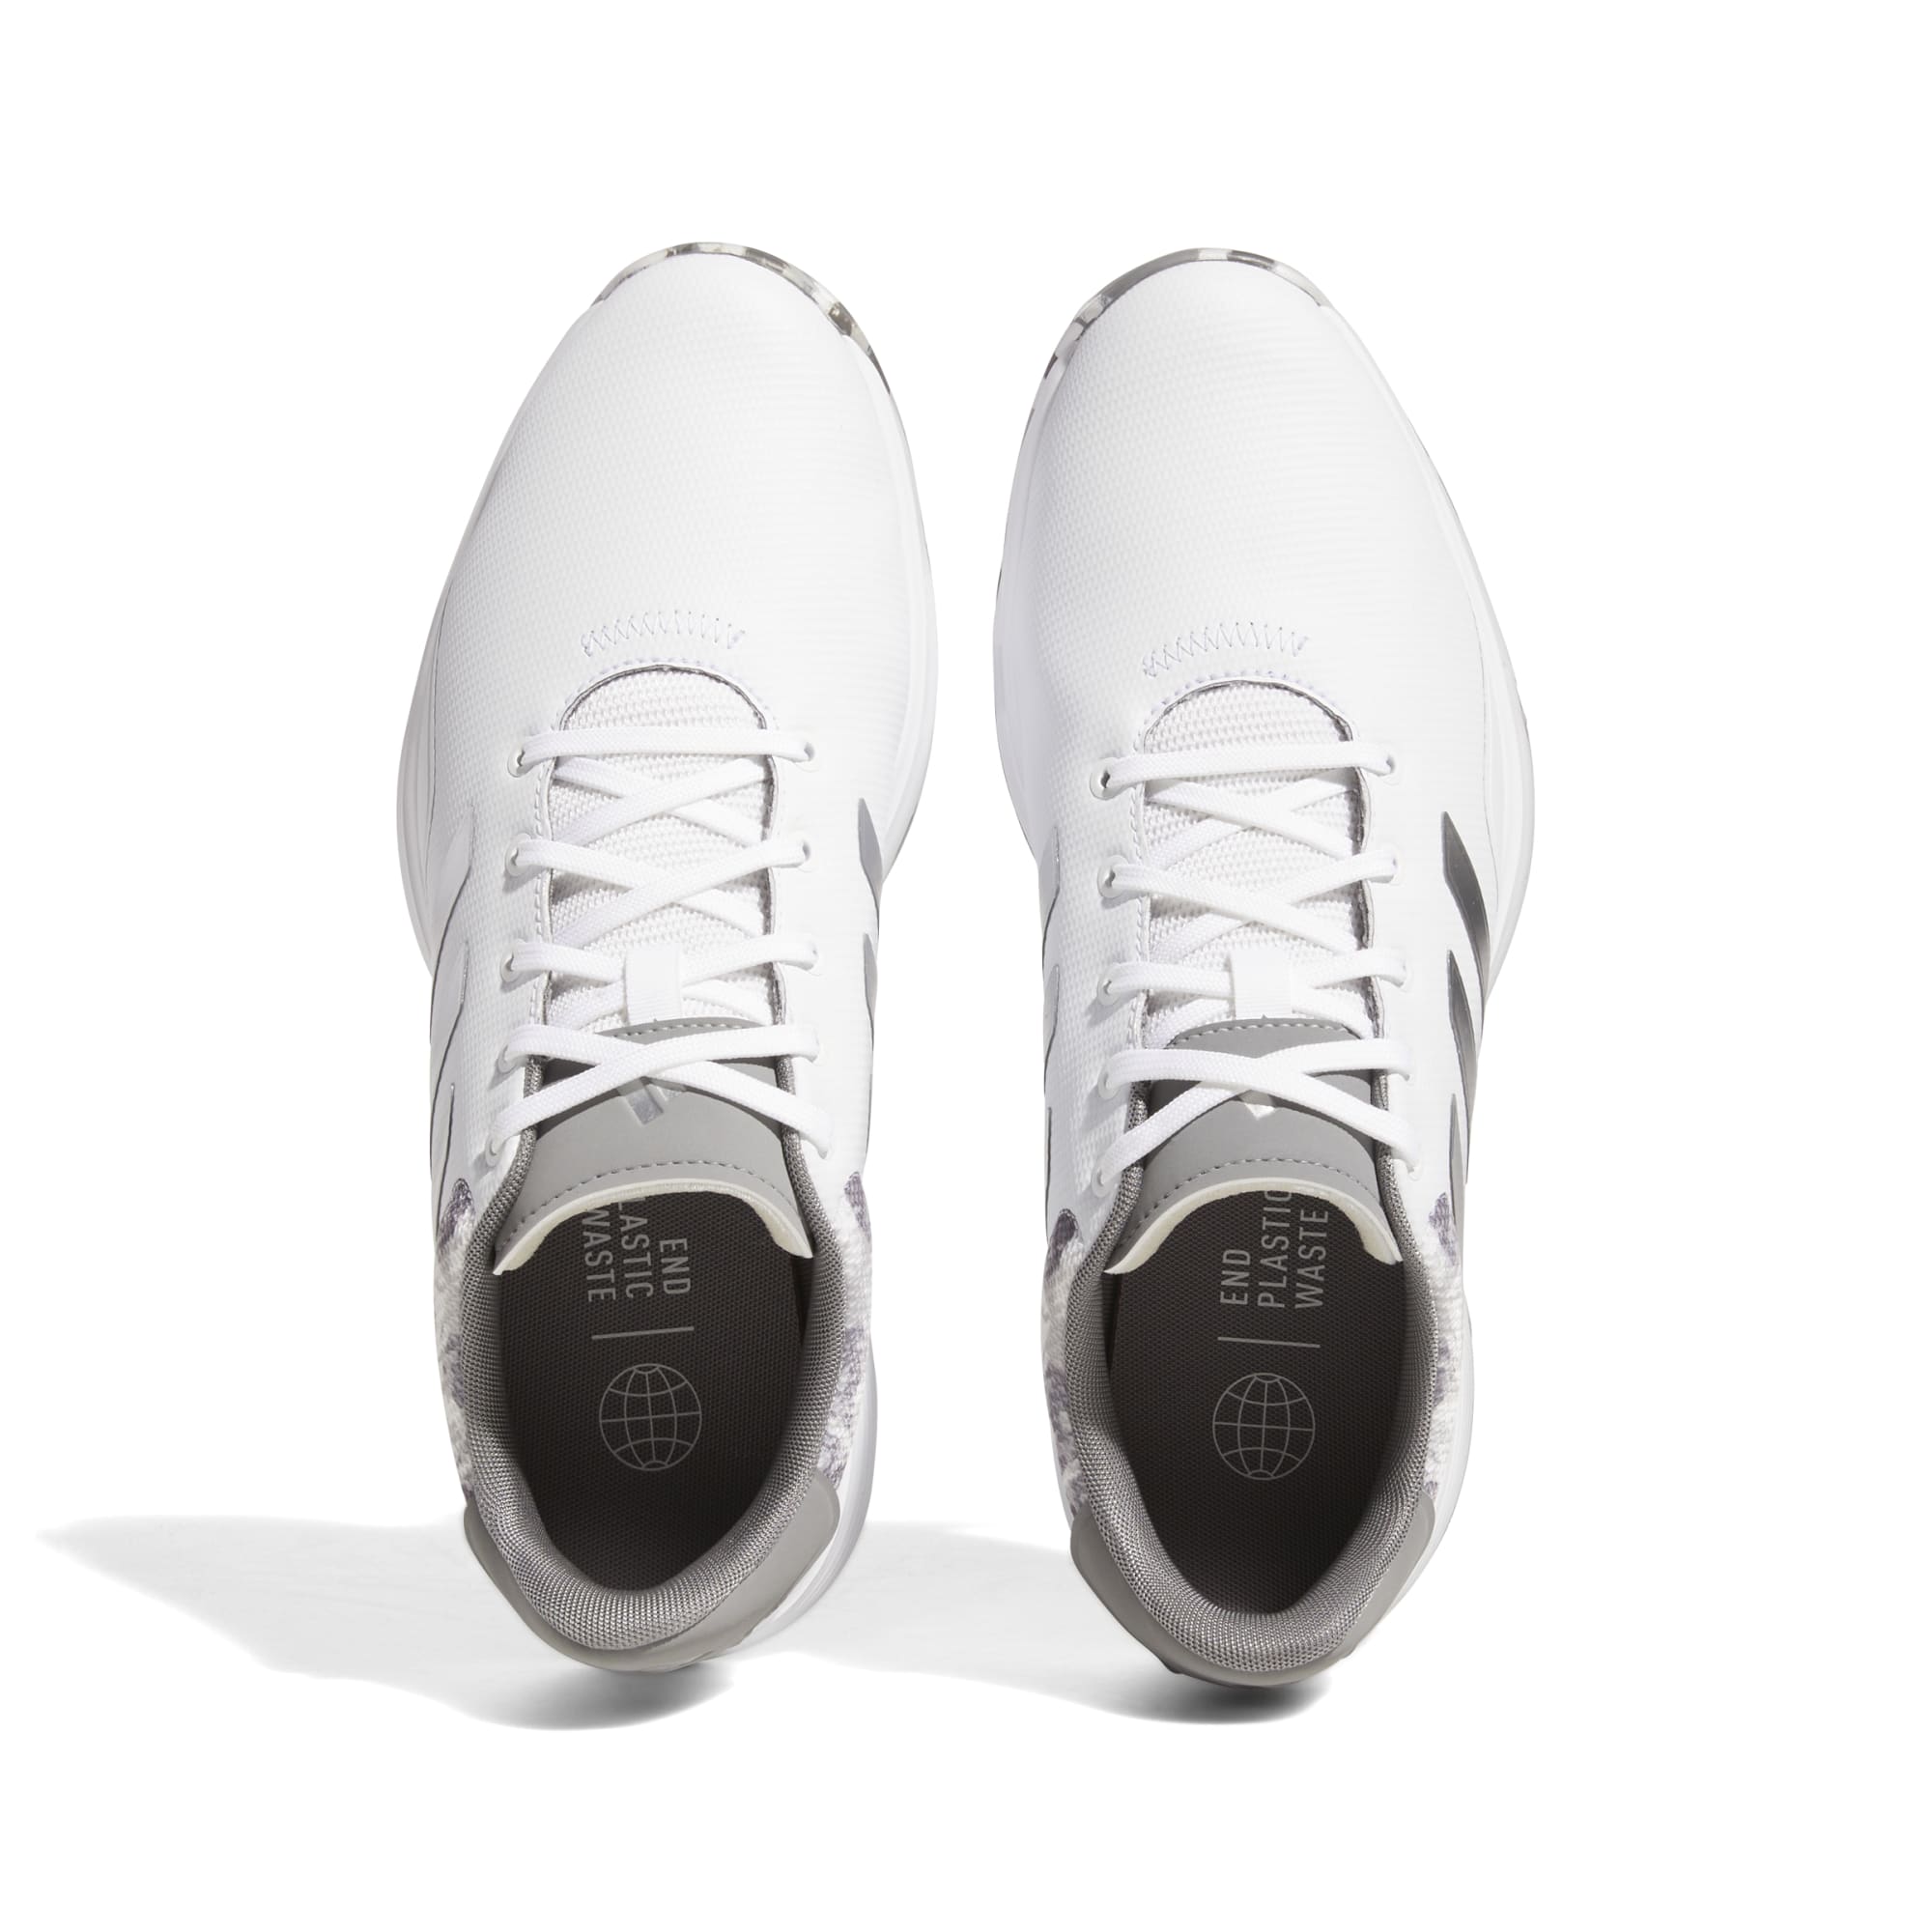 adidas Mens S2G Spiked Golf Shoes 